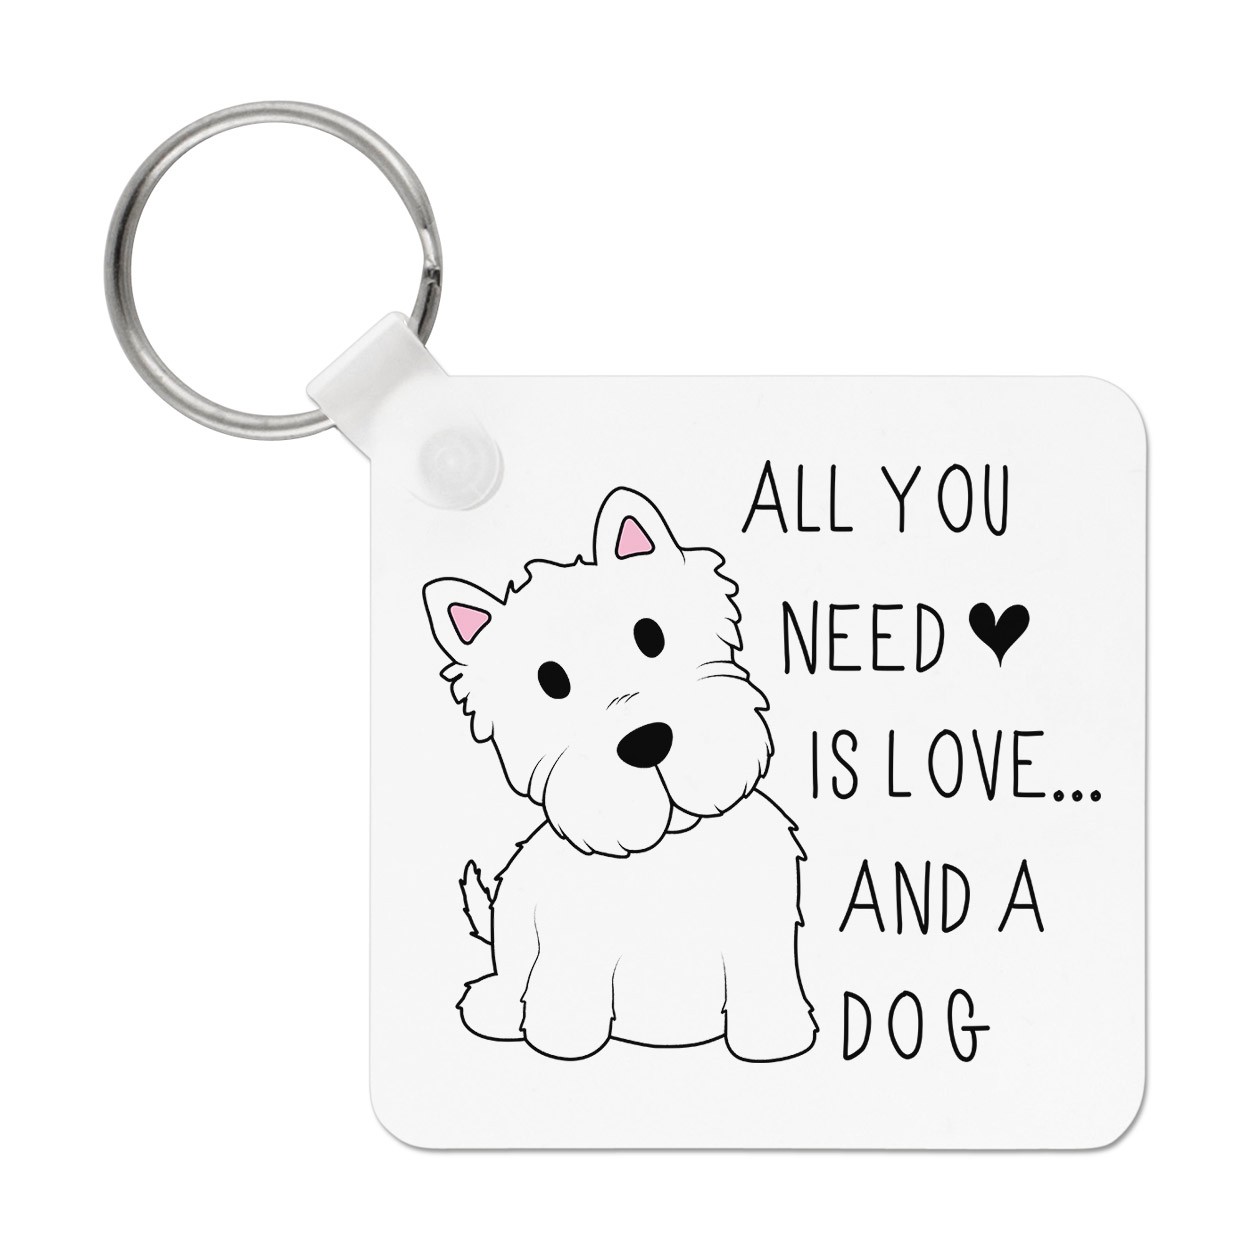 All You Need Is Love And A Dog Keyring Key Chain